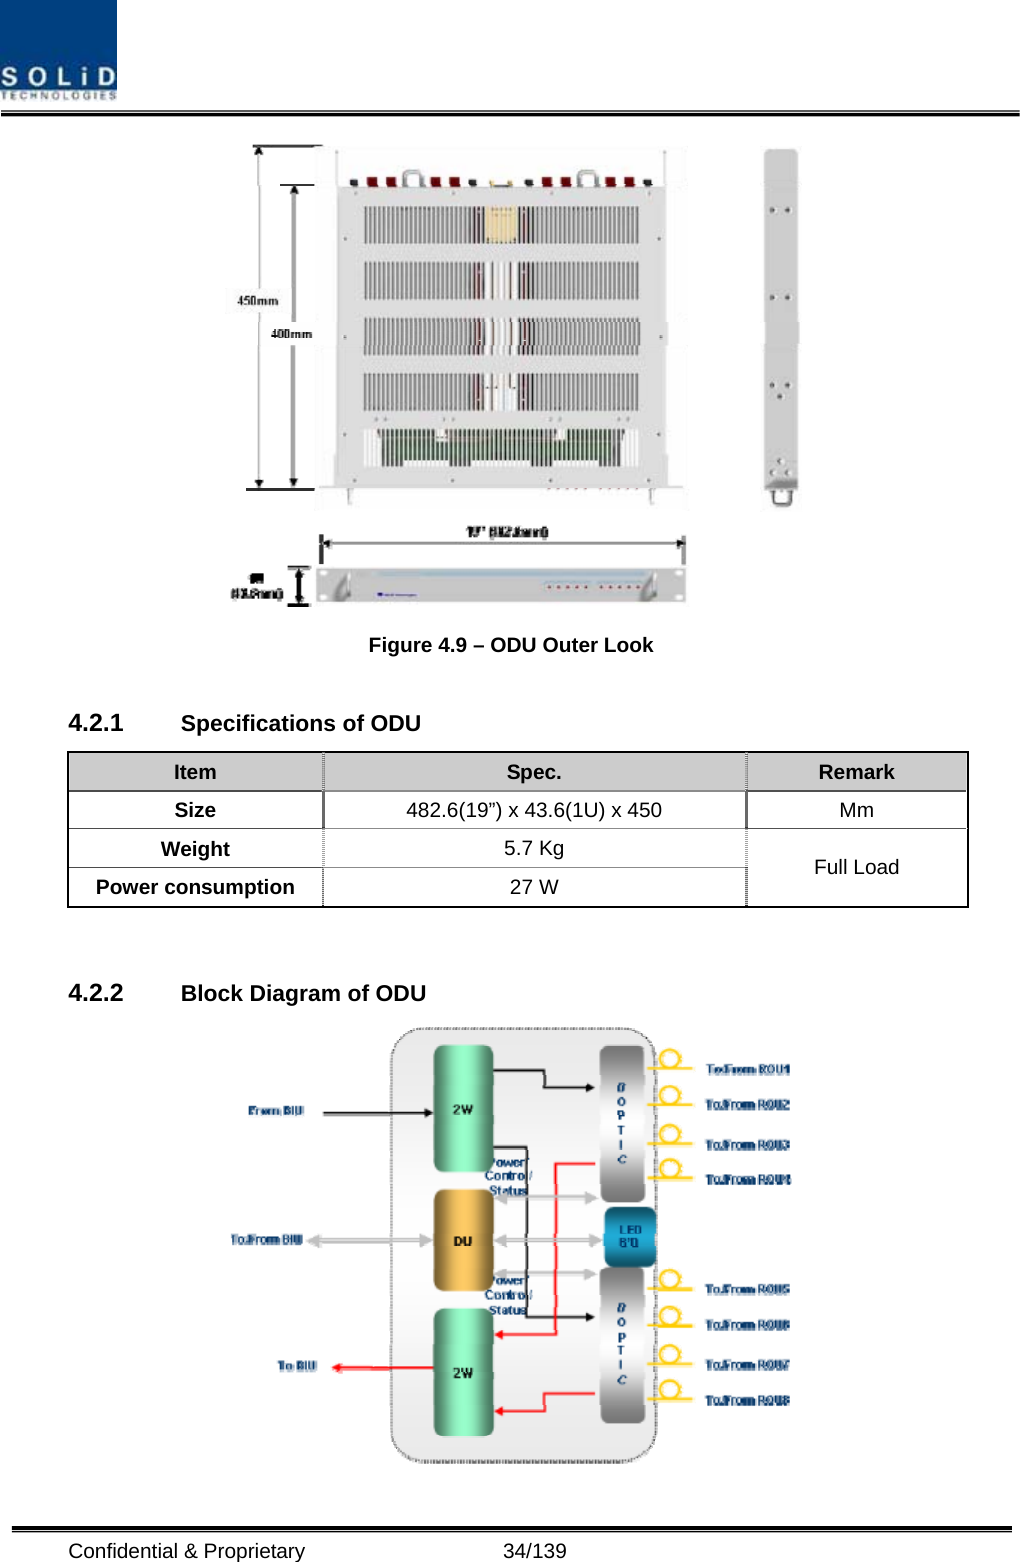  Confidential &amp; Proprietary                   34/139  Figure 4.9 – ODU Outer Look  4.2.1  Specifications of ODU Item  Spec.  Remark Size  482.6(19”) x 43.6(1U) x 450  Mm Weight  5.7 Kg Power consumption  27 W  Full Load  4.2.2  Block Diagram of ODU  